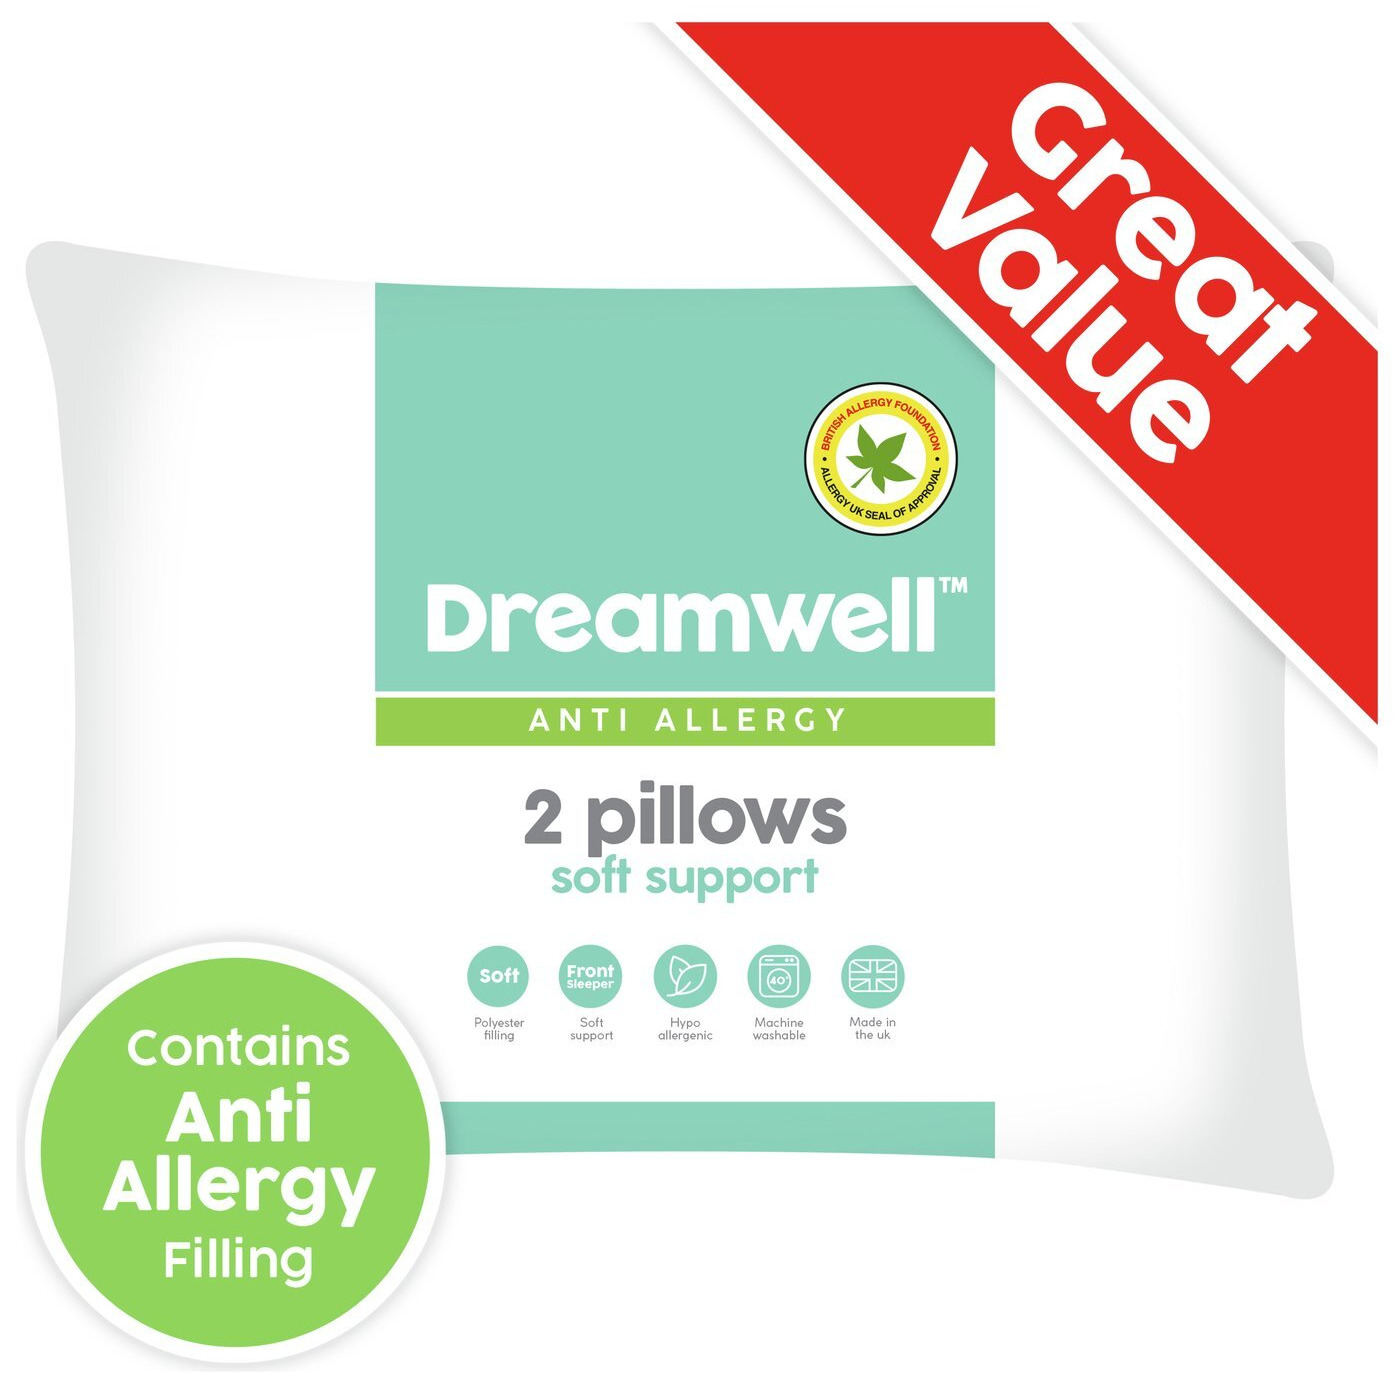 Dreamwell Anti-Allergy Soft Support Pillow - 2 Pack - image 1